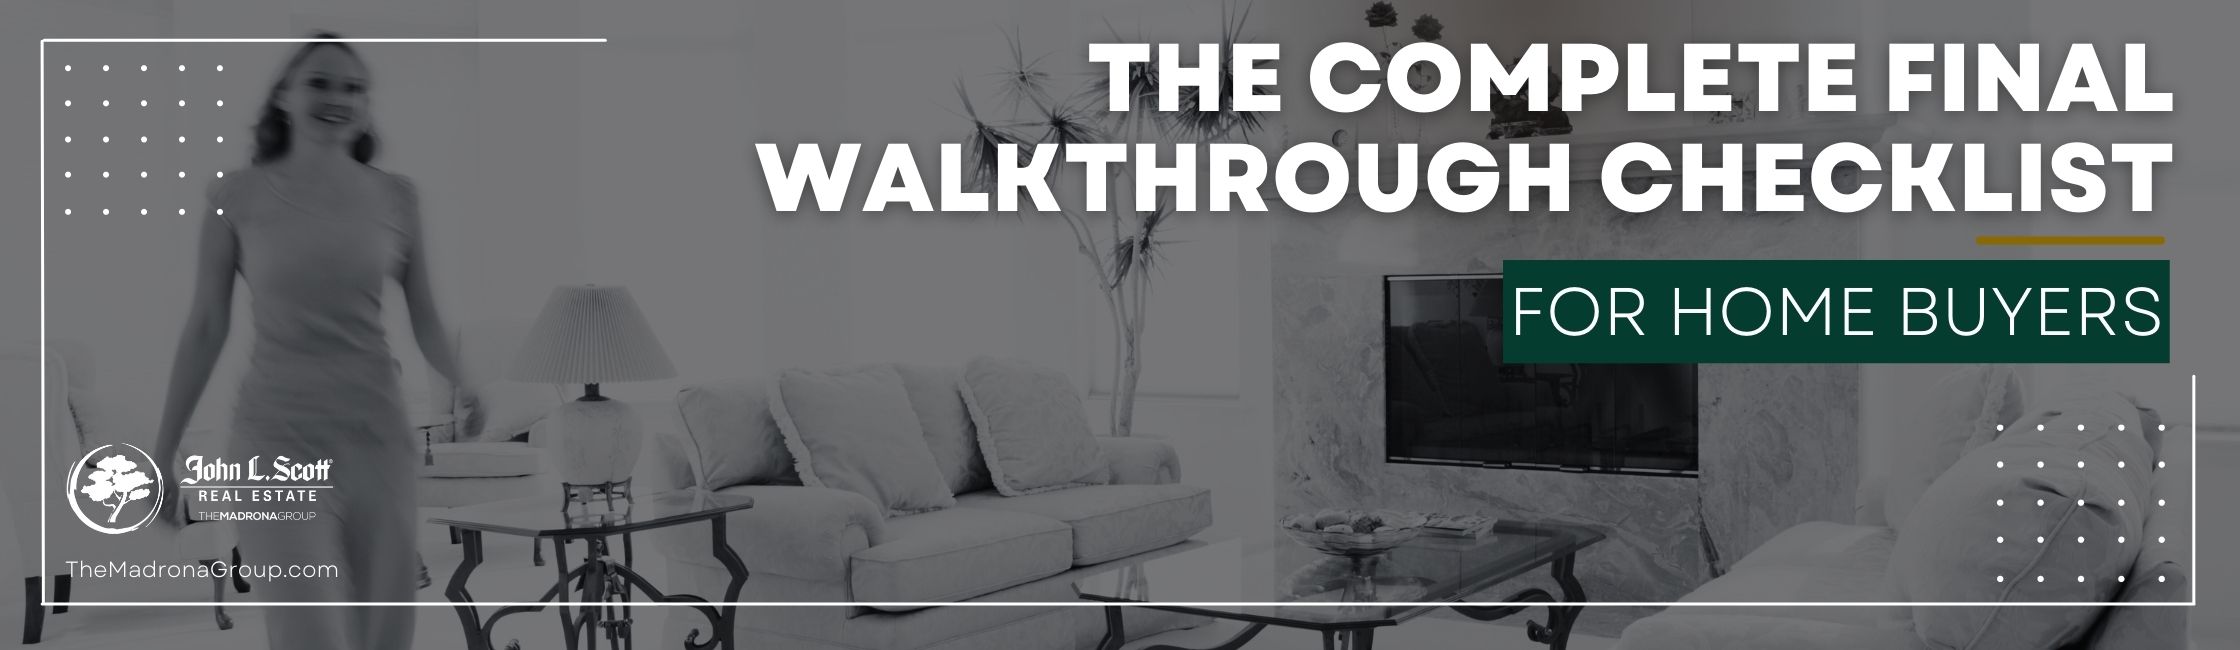 The Complete Final Walkthrough Checklist for Home Buyers